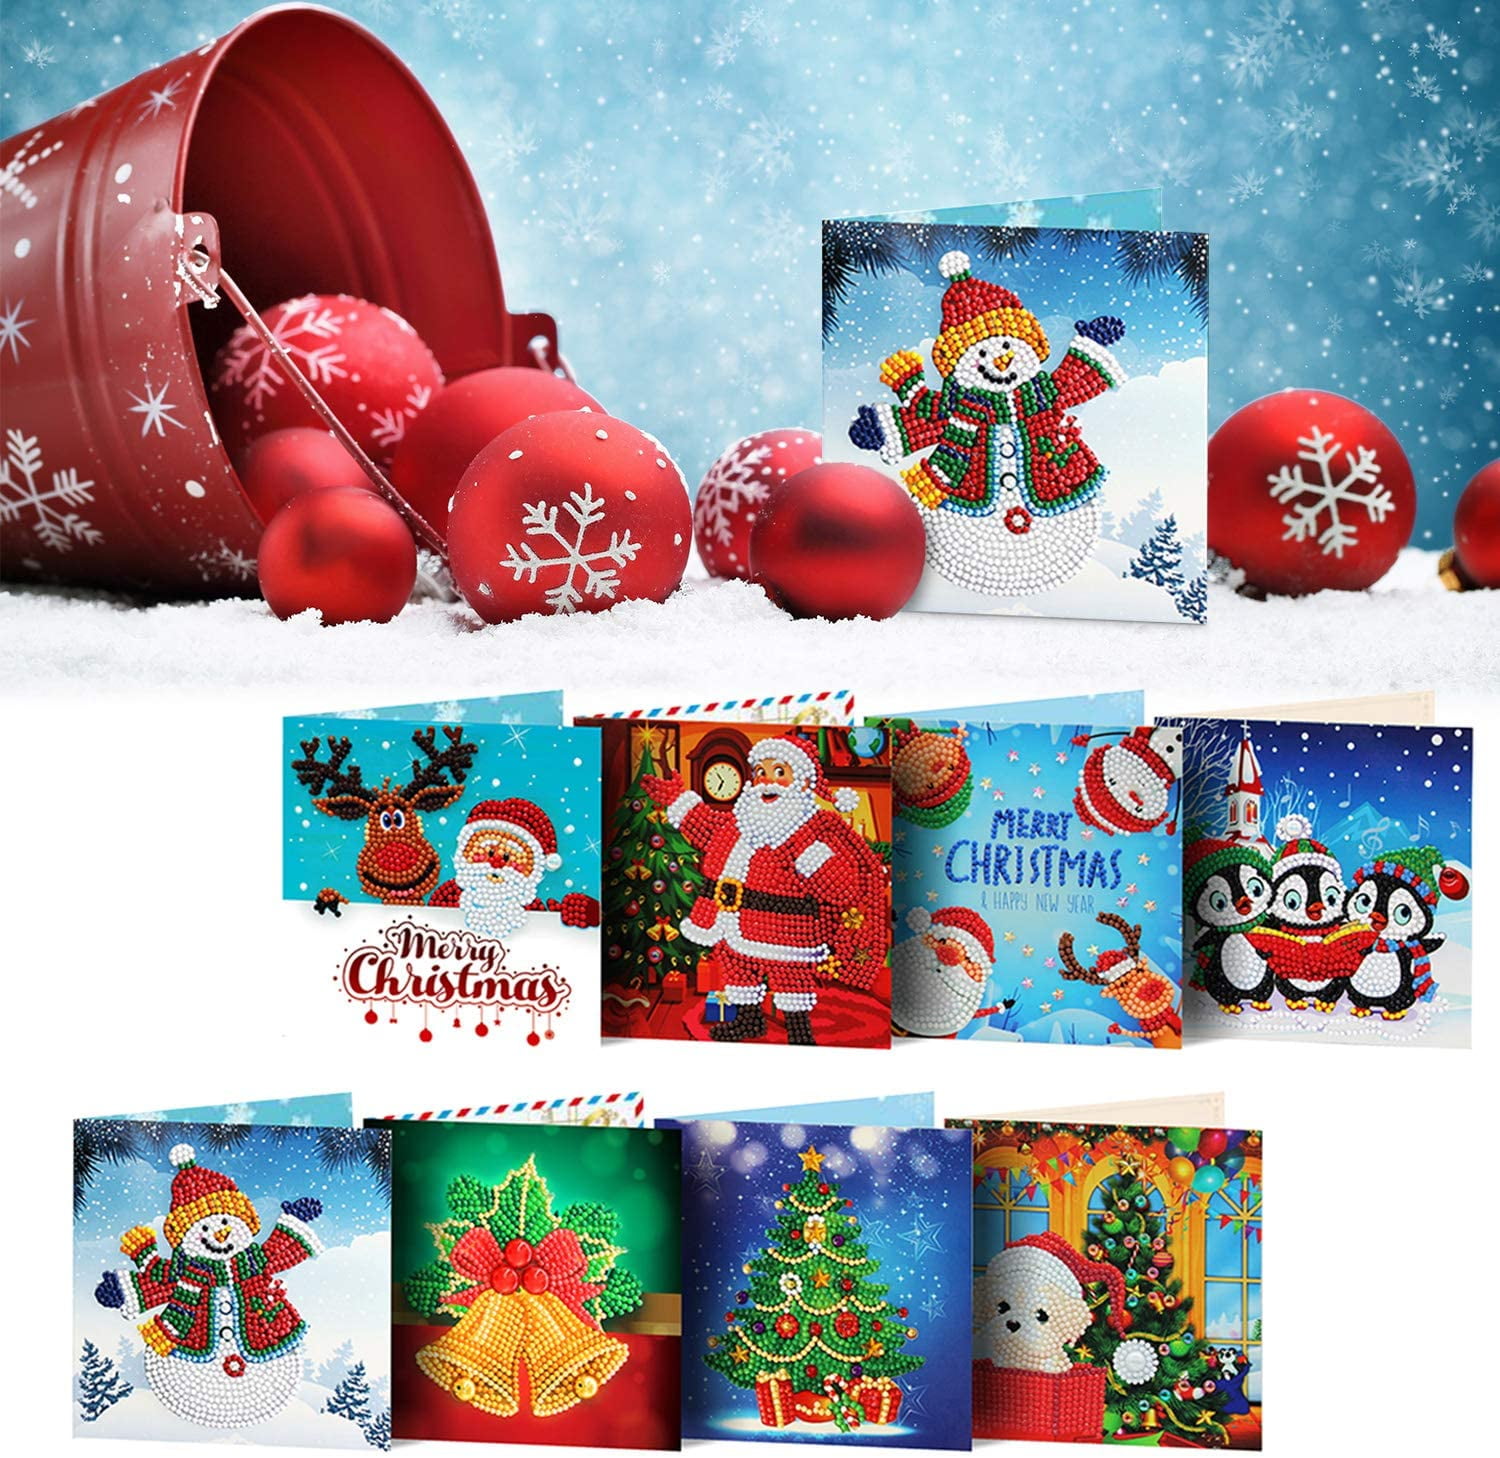 8 Pack Christmas Cards Diamond Painting Kits Paint by Number Kits Christmas DIY Gift for Holiday